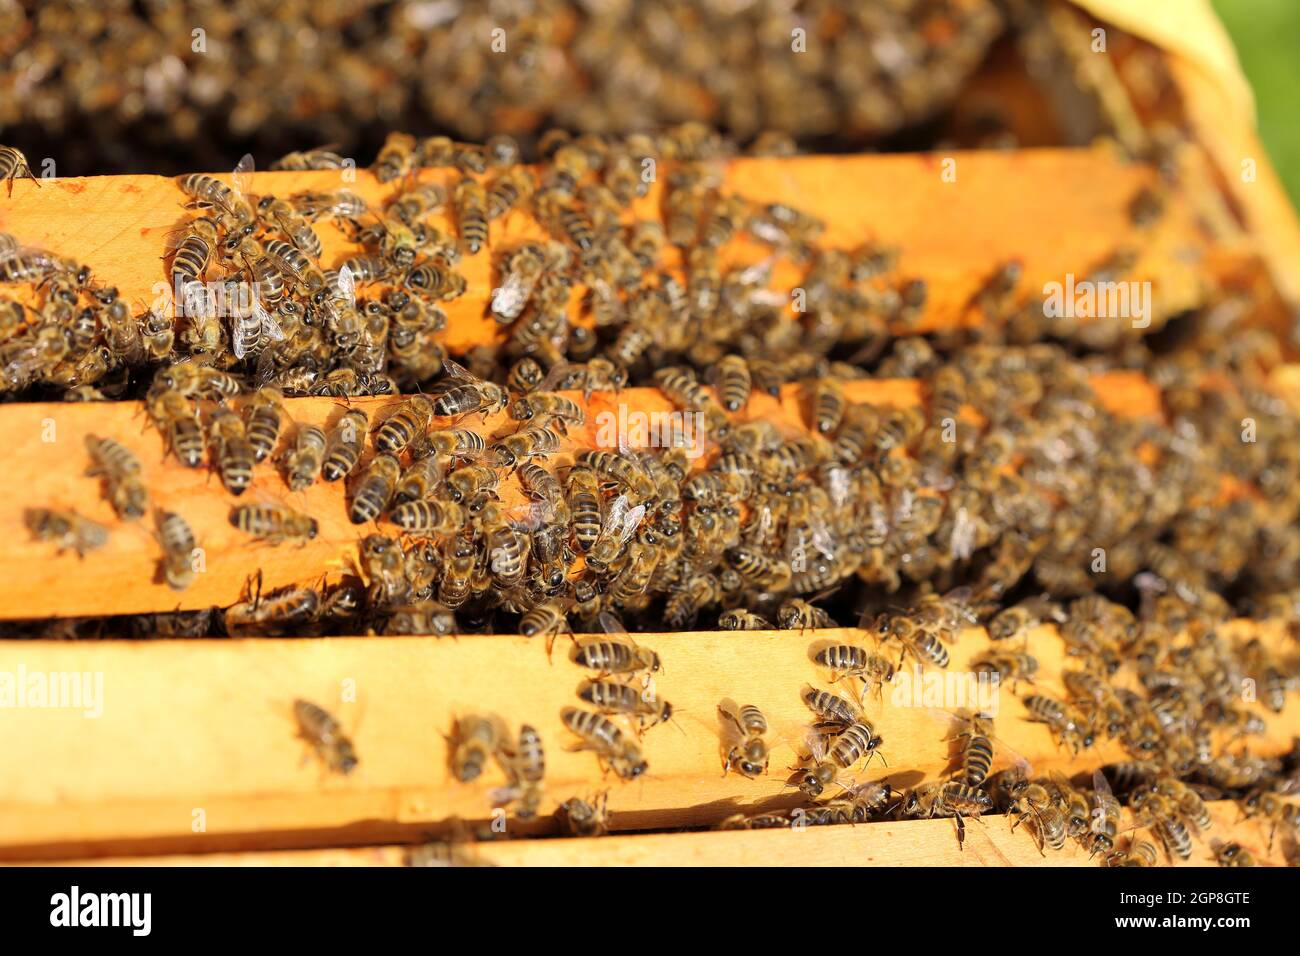 Close up view of the working bees on honey cells with frame Stock Photo